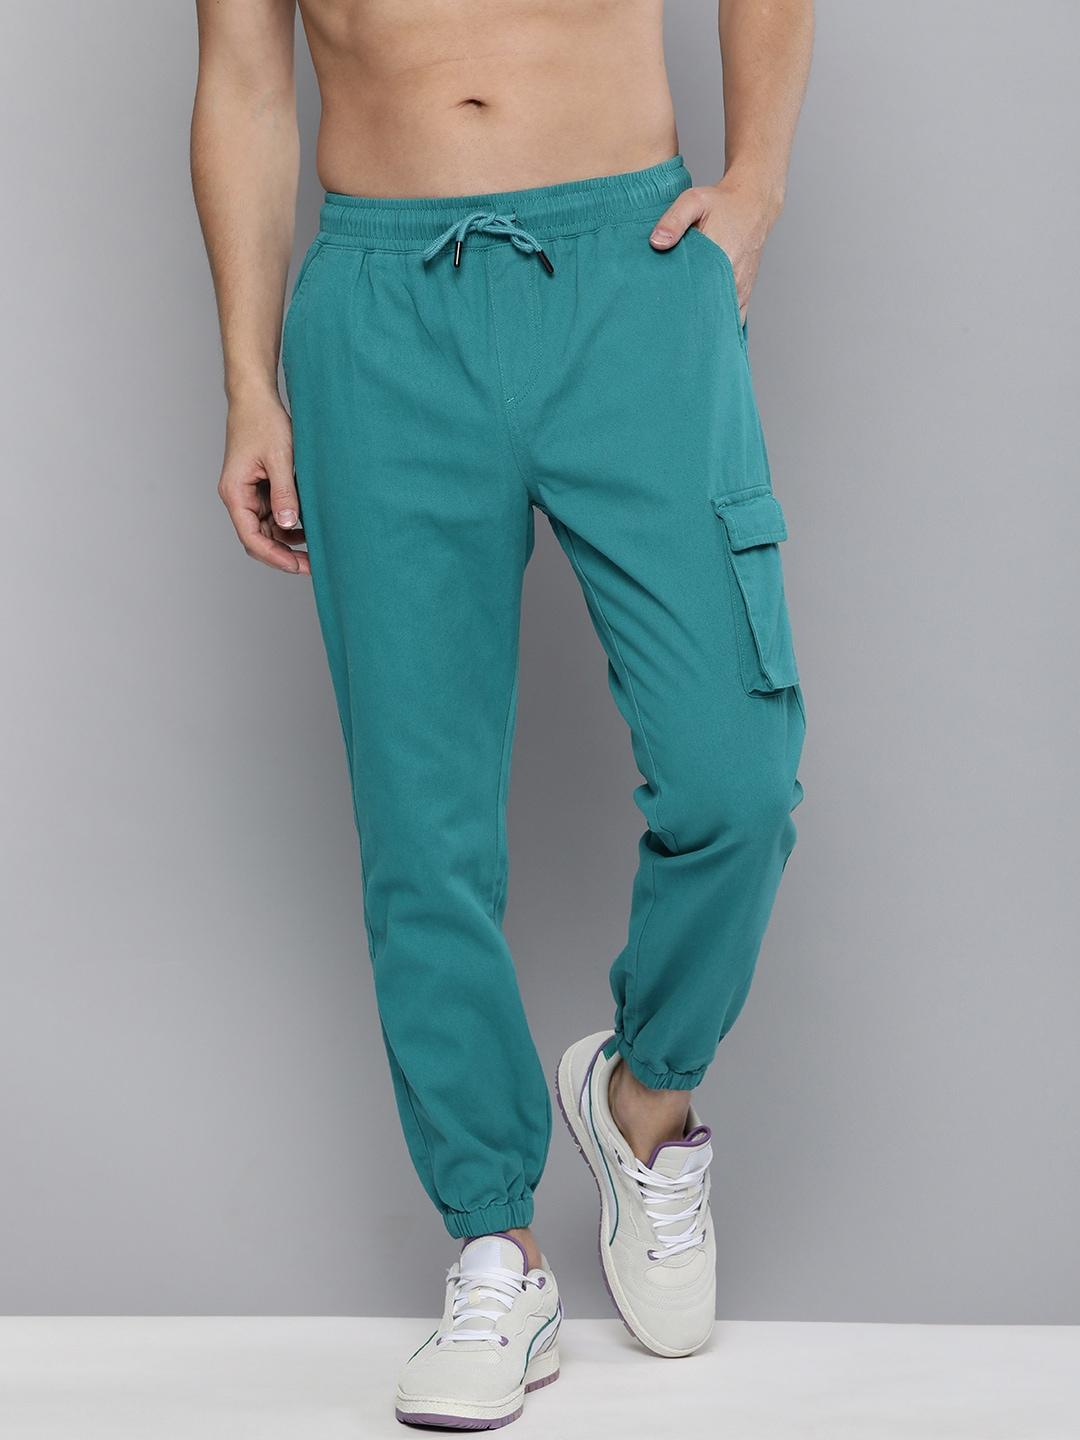 here&now men teal blue solid easy wash joggers trousers